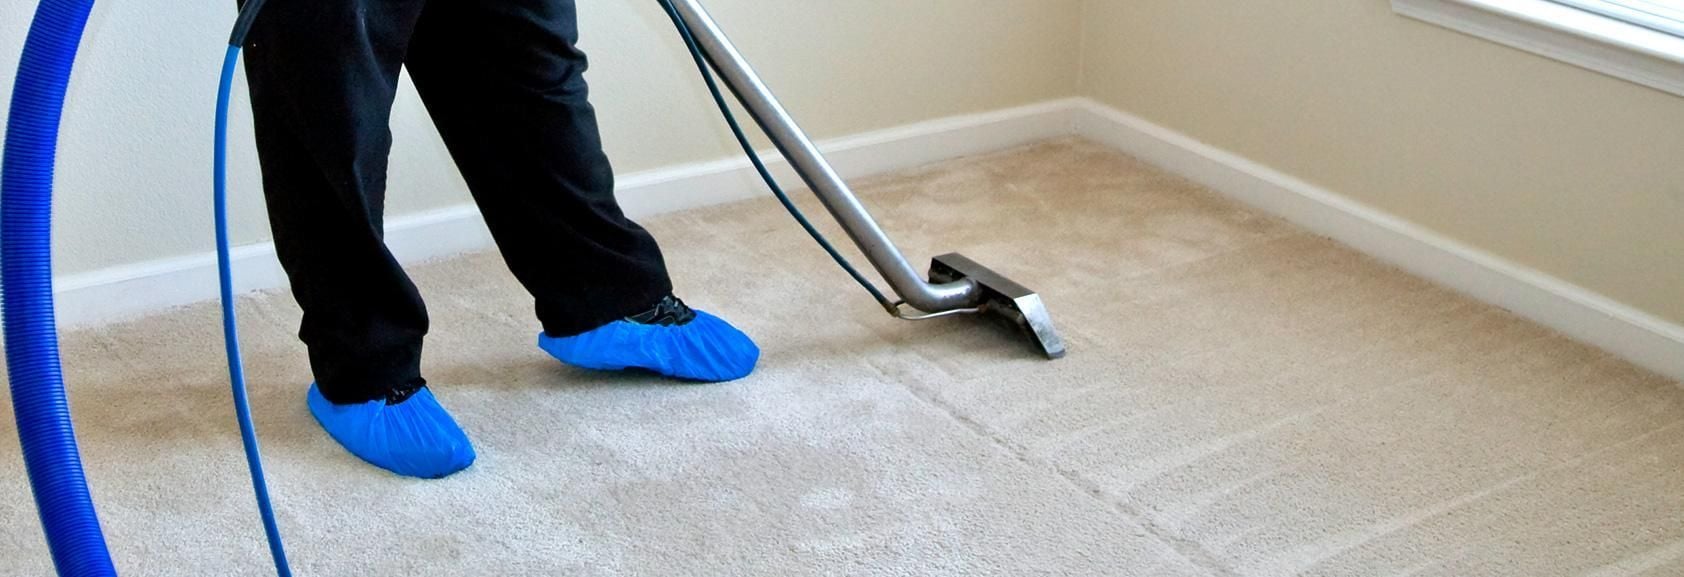 Carpet Cleaning Service Serving Colorado Springs, CO